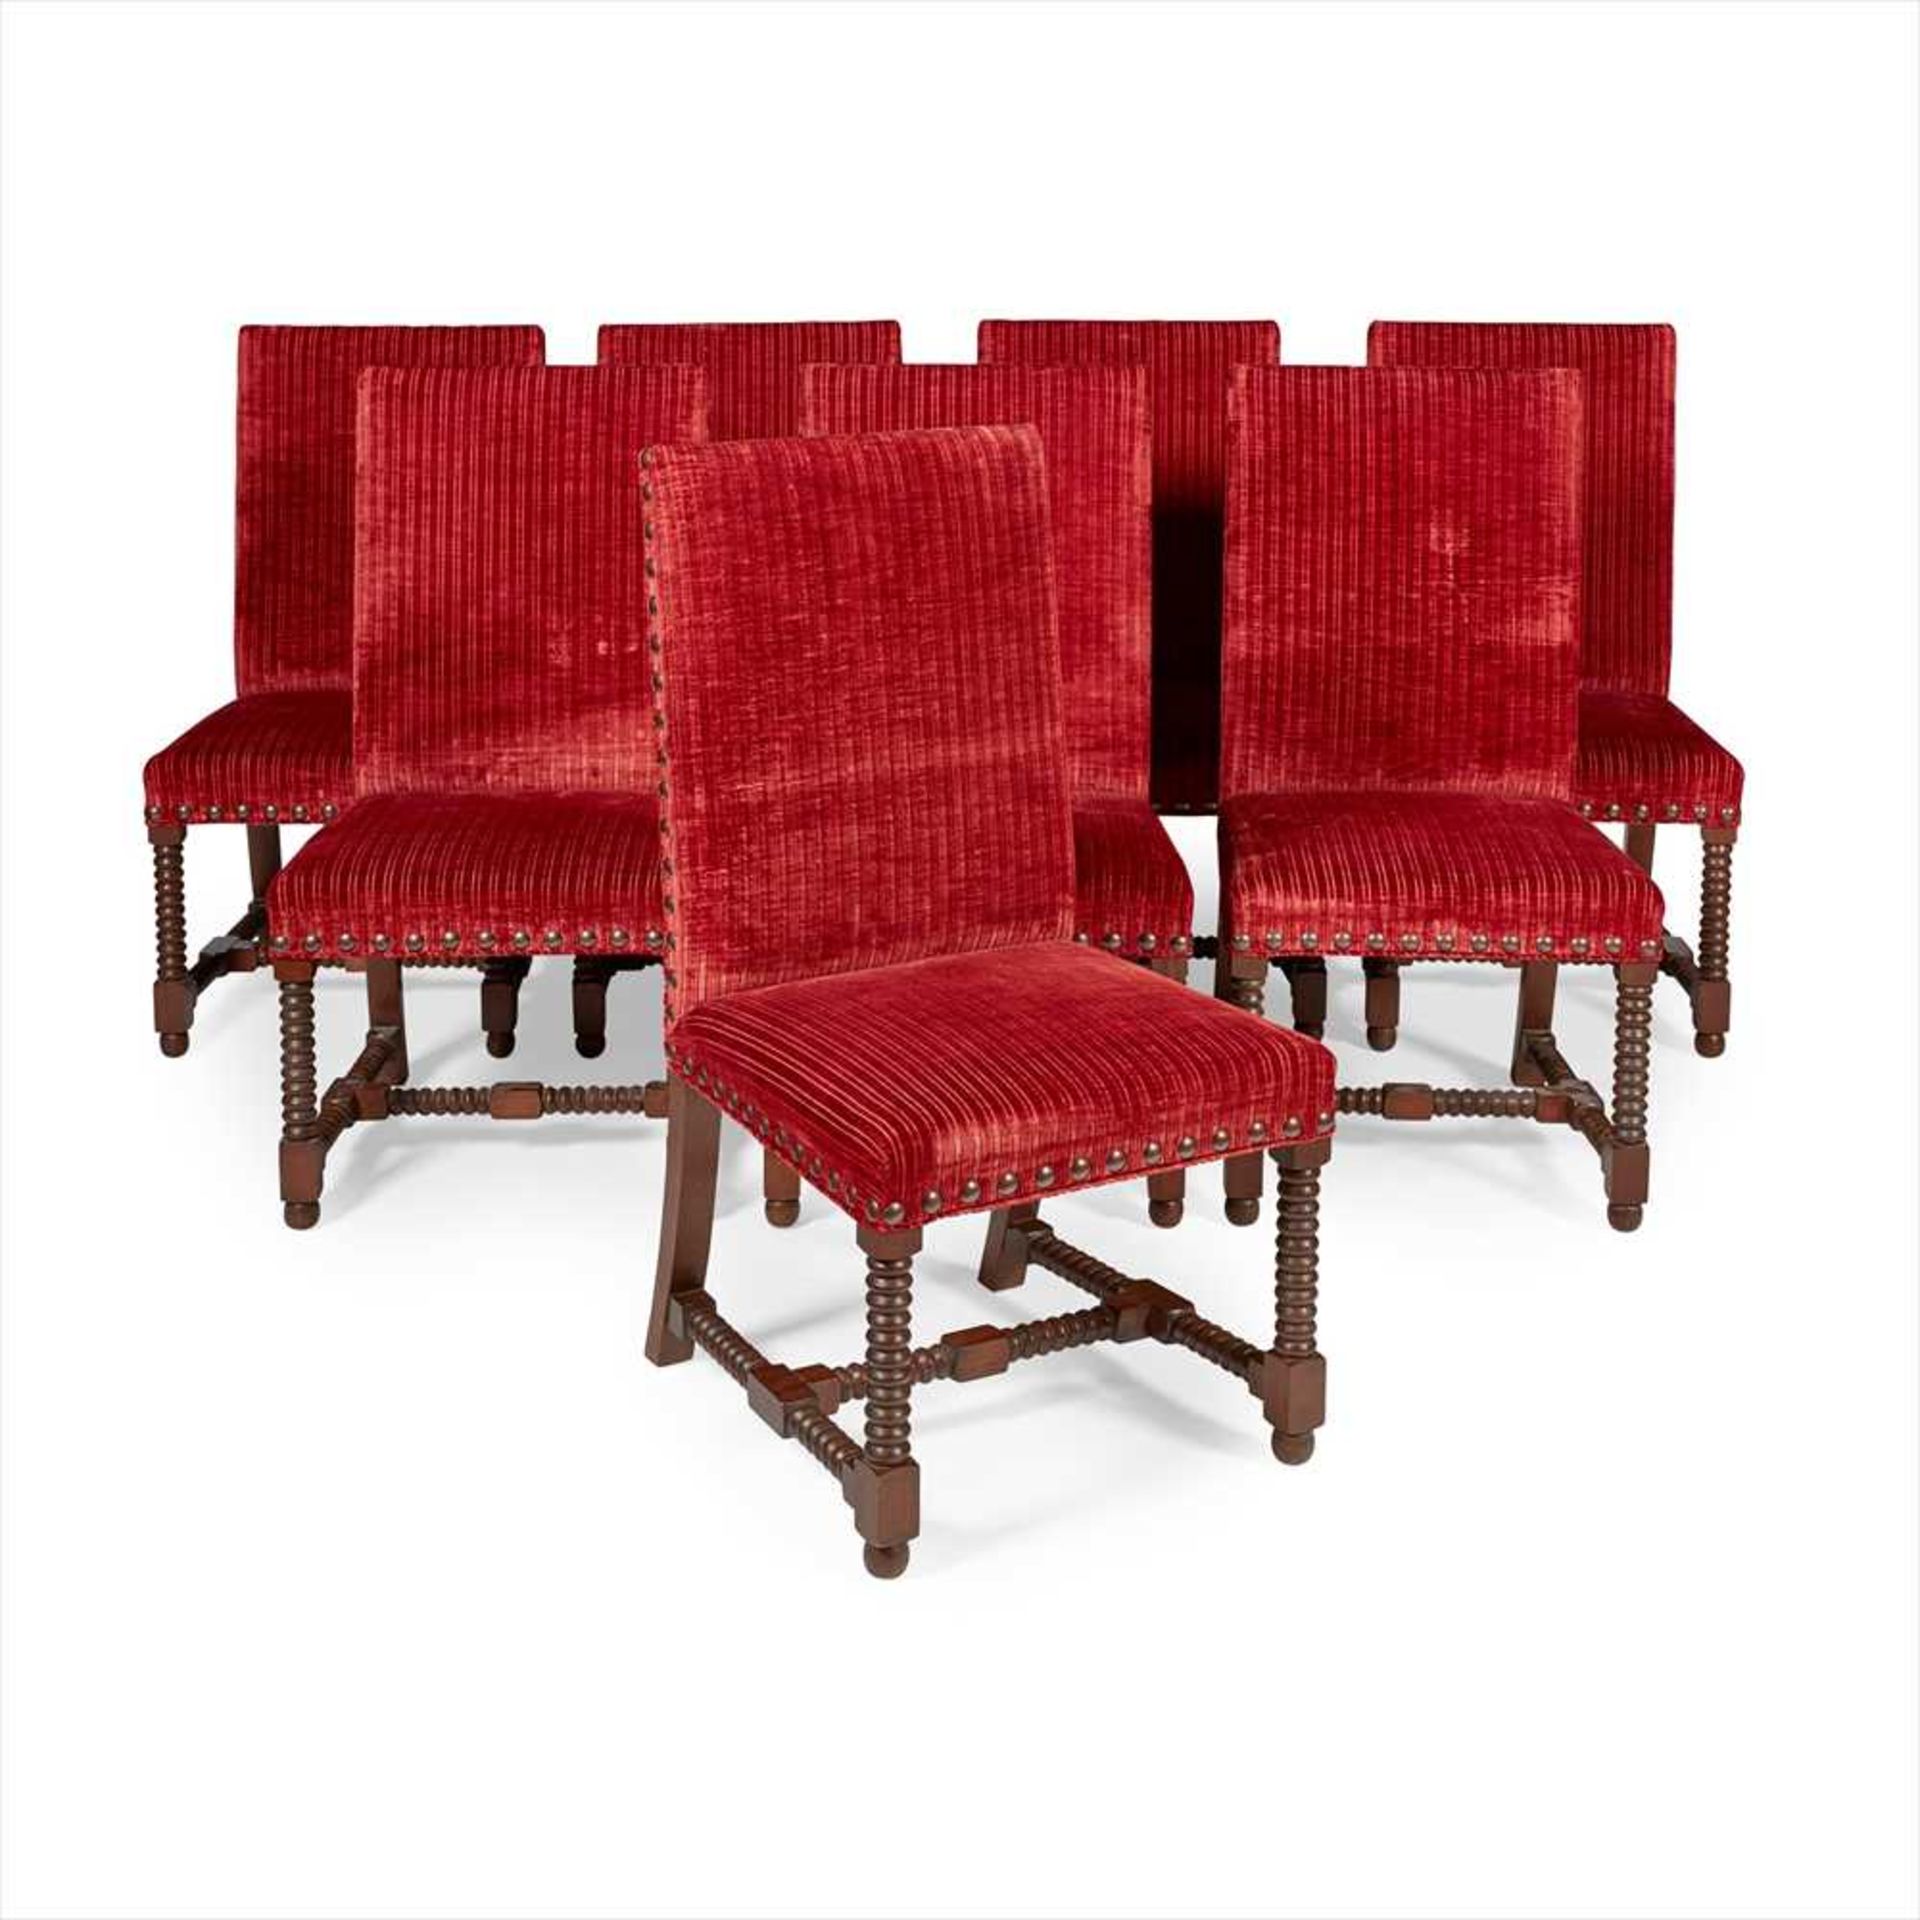 SET OF TEN WILLIAM AND MARY STYLE DINING CHAIRS MODERN - Image 2 of 3